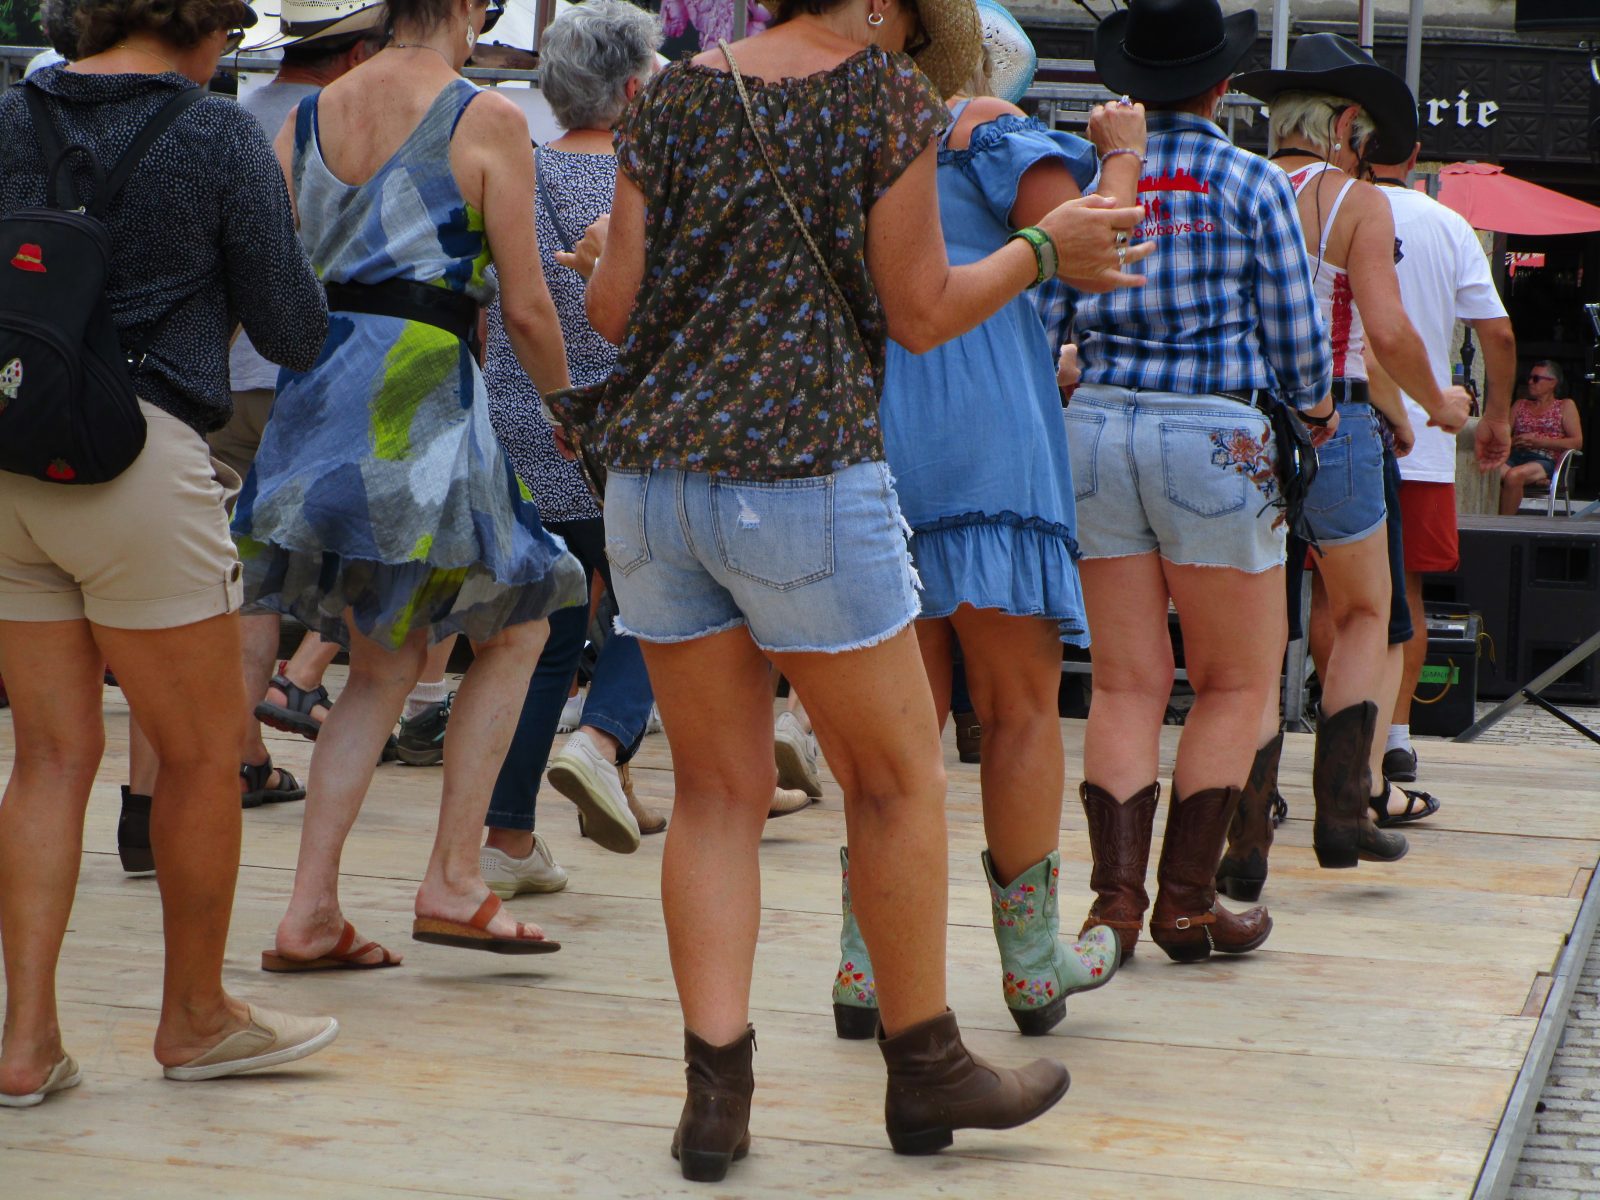 Country – Festival off